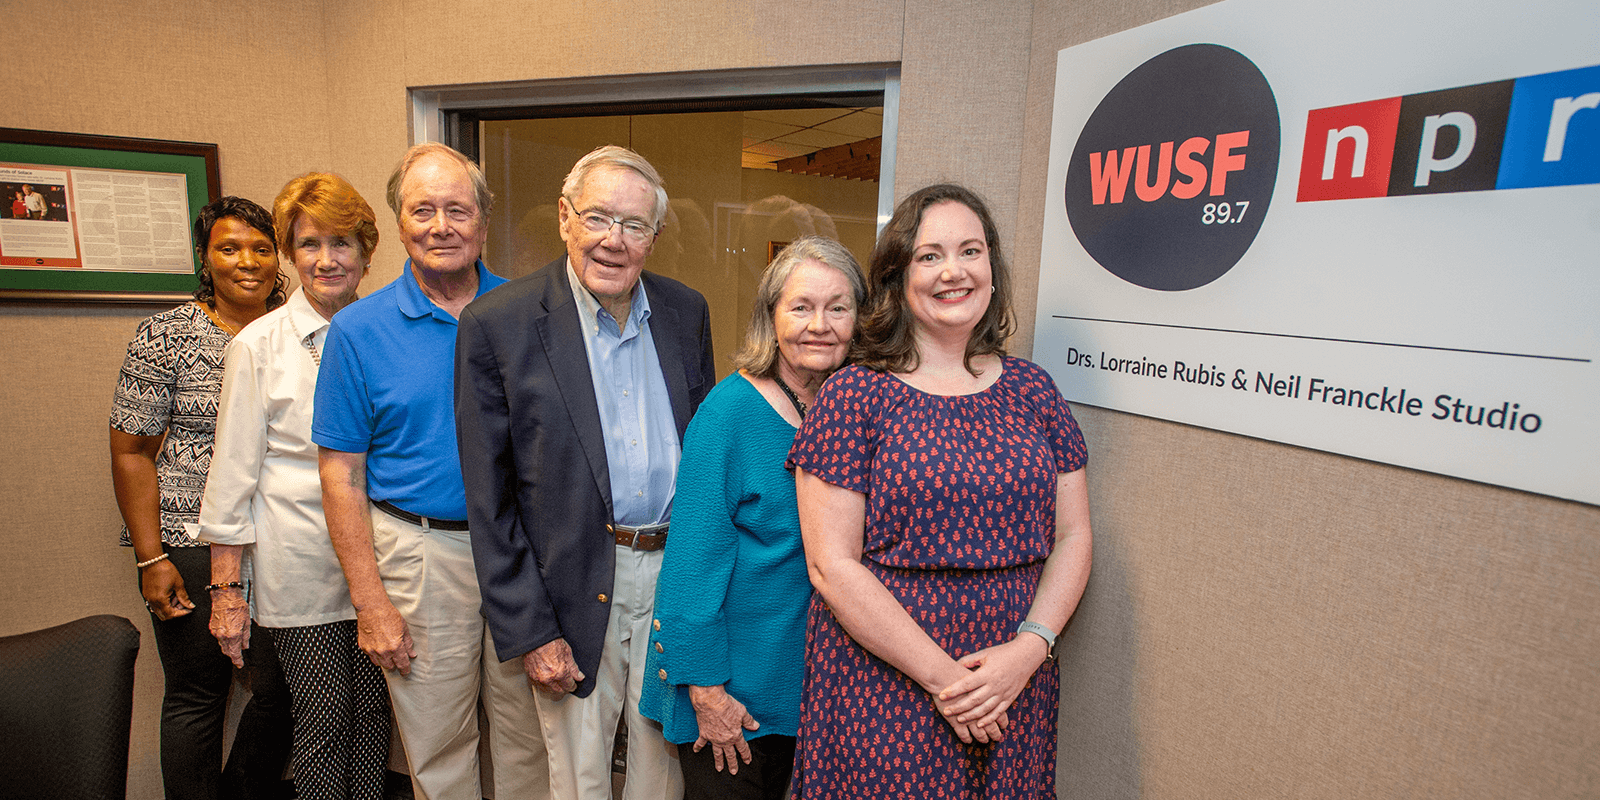 Dr. Neil Franckle and and others pose for a photo outside newly named studio at WUSF